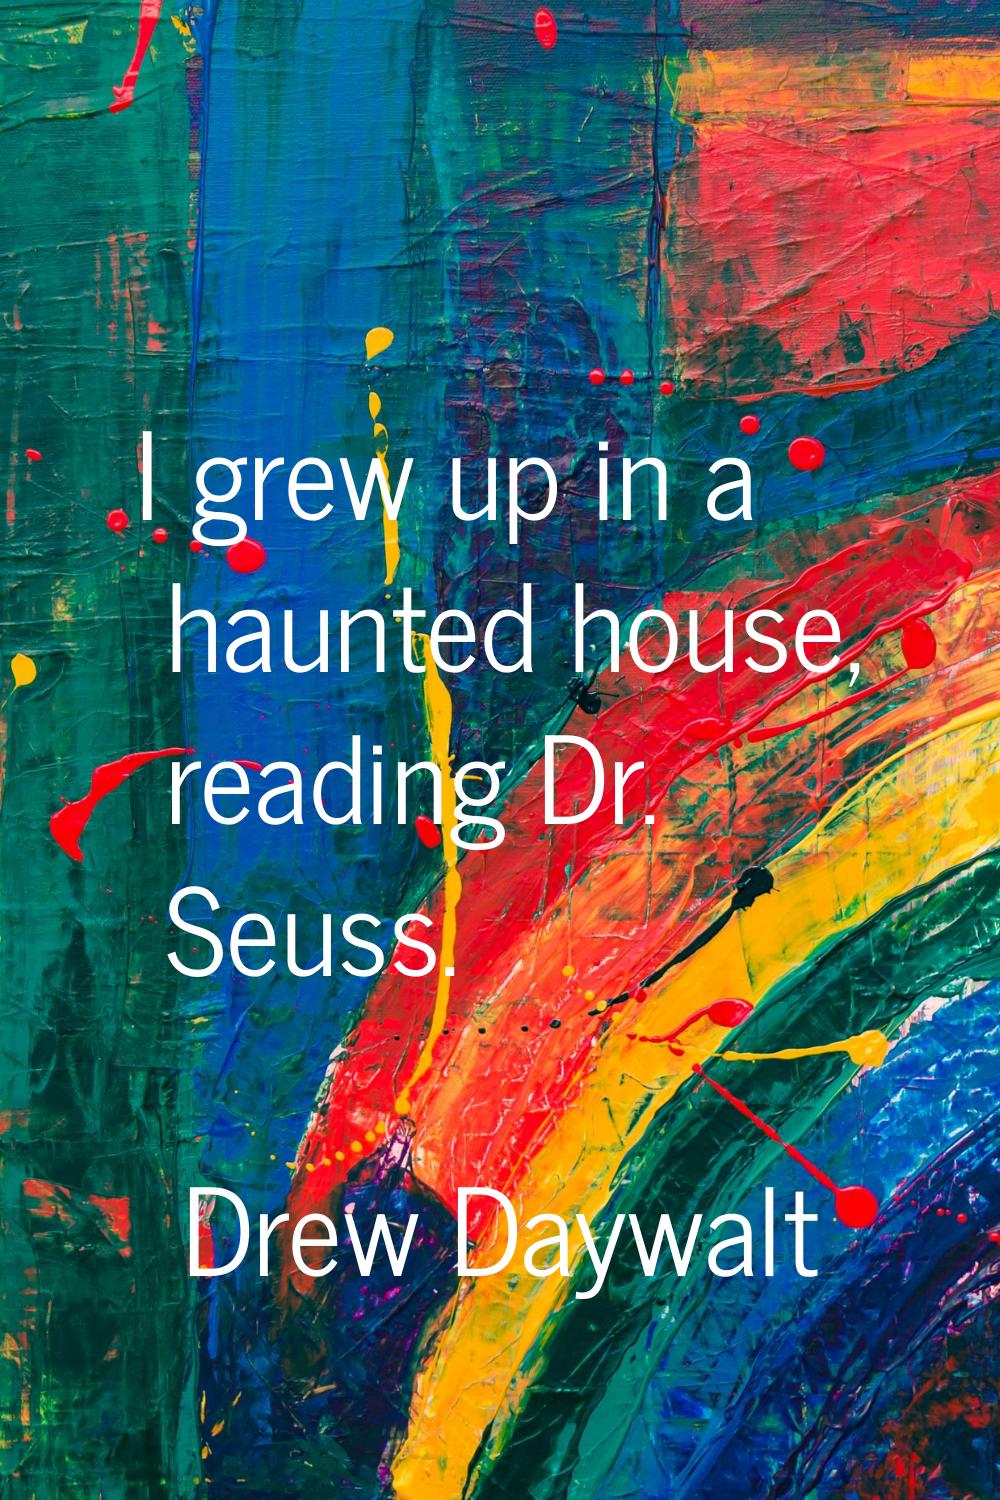 I grew up in a haunted house, reading Dr. Seuss.